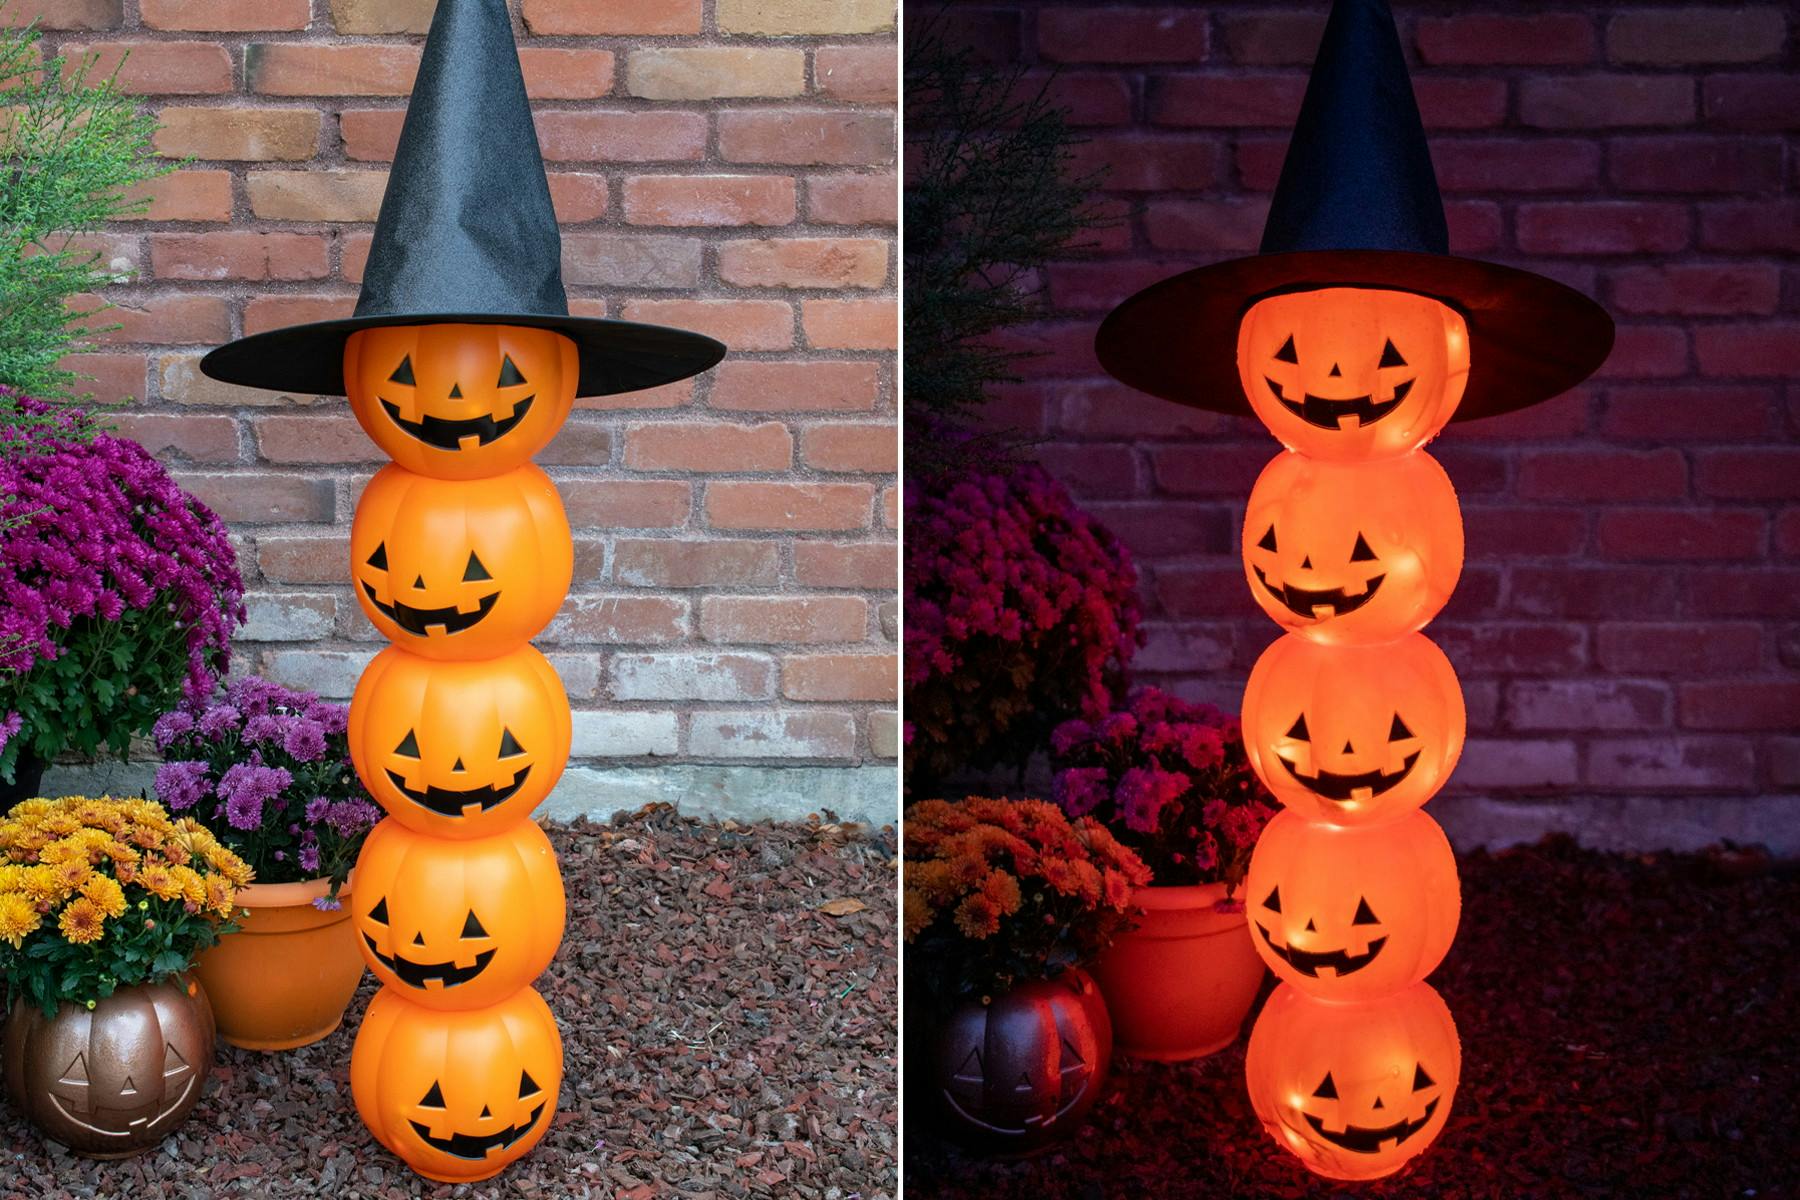 A light-up Halloween pumpkin totem made from plastic trick-or-treat pumpkin pails and a witch hat set up in a garden.